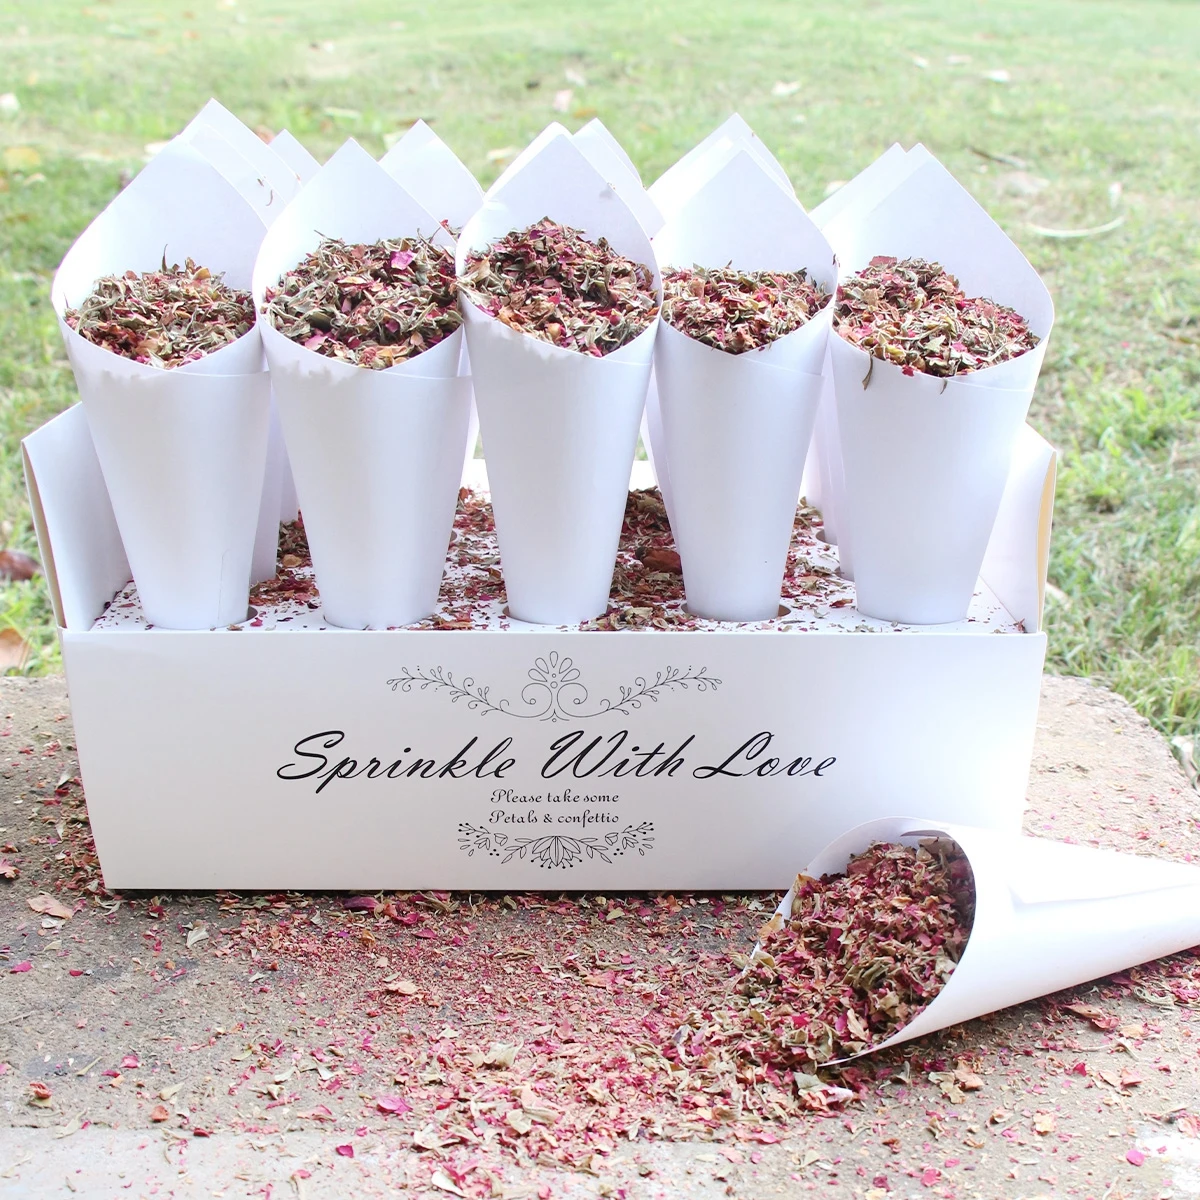 20pcs Hollow Confetti Holders Craft Paper Petal Cones for Wedding Party Storage (White), Size: 14*14 cm